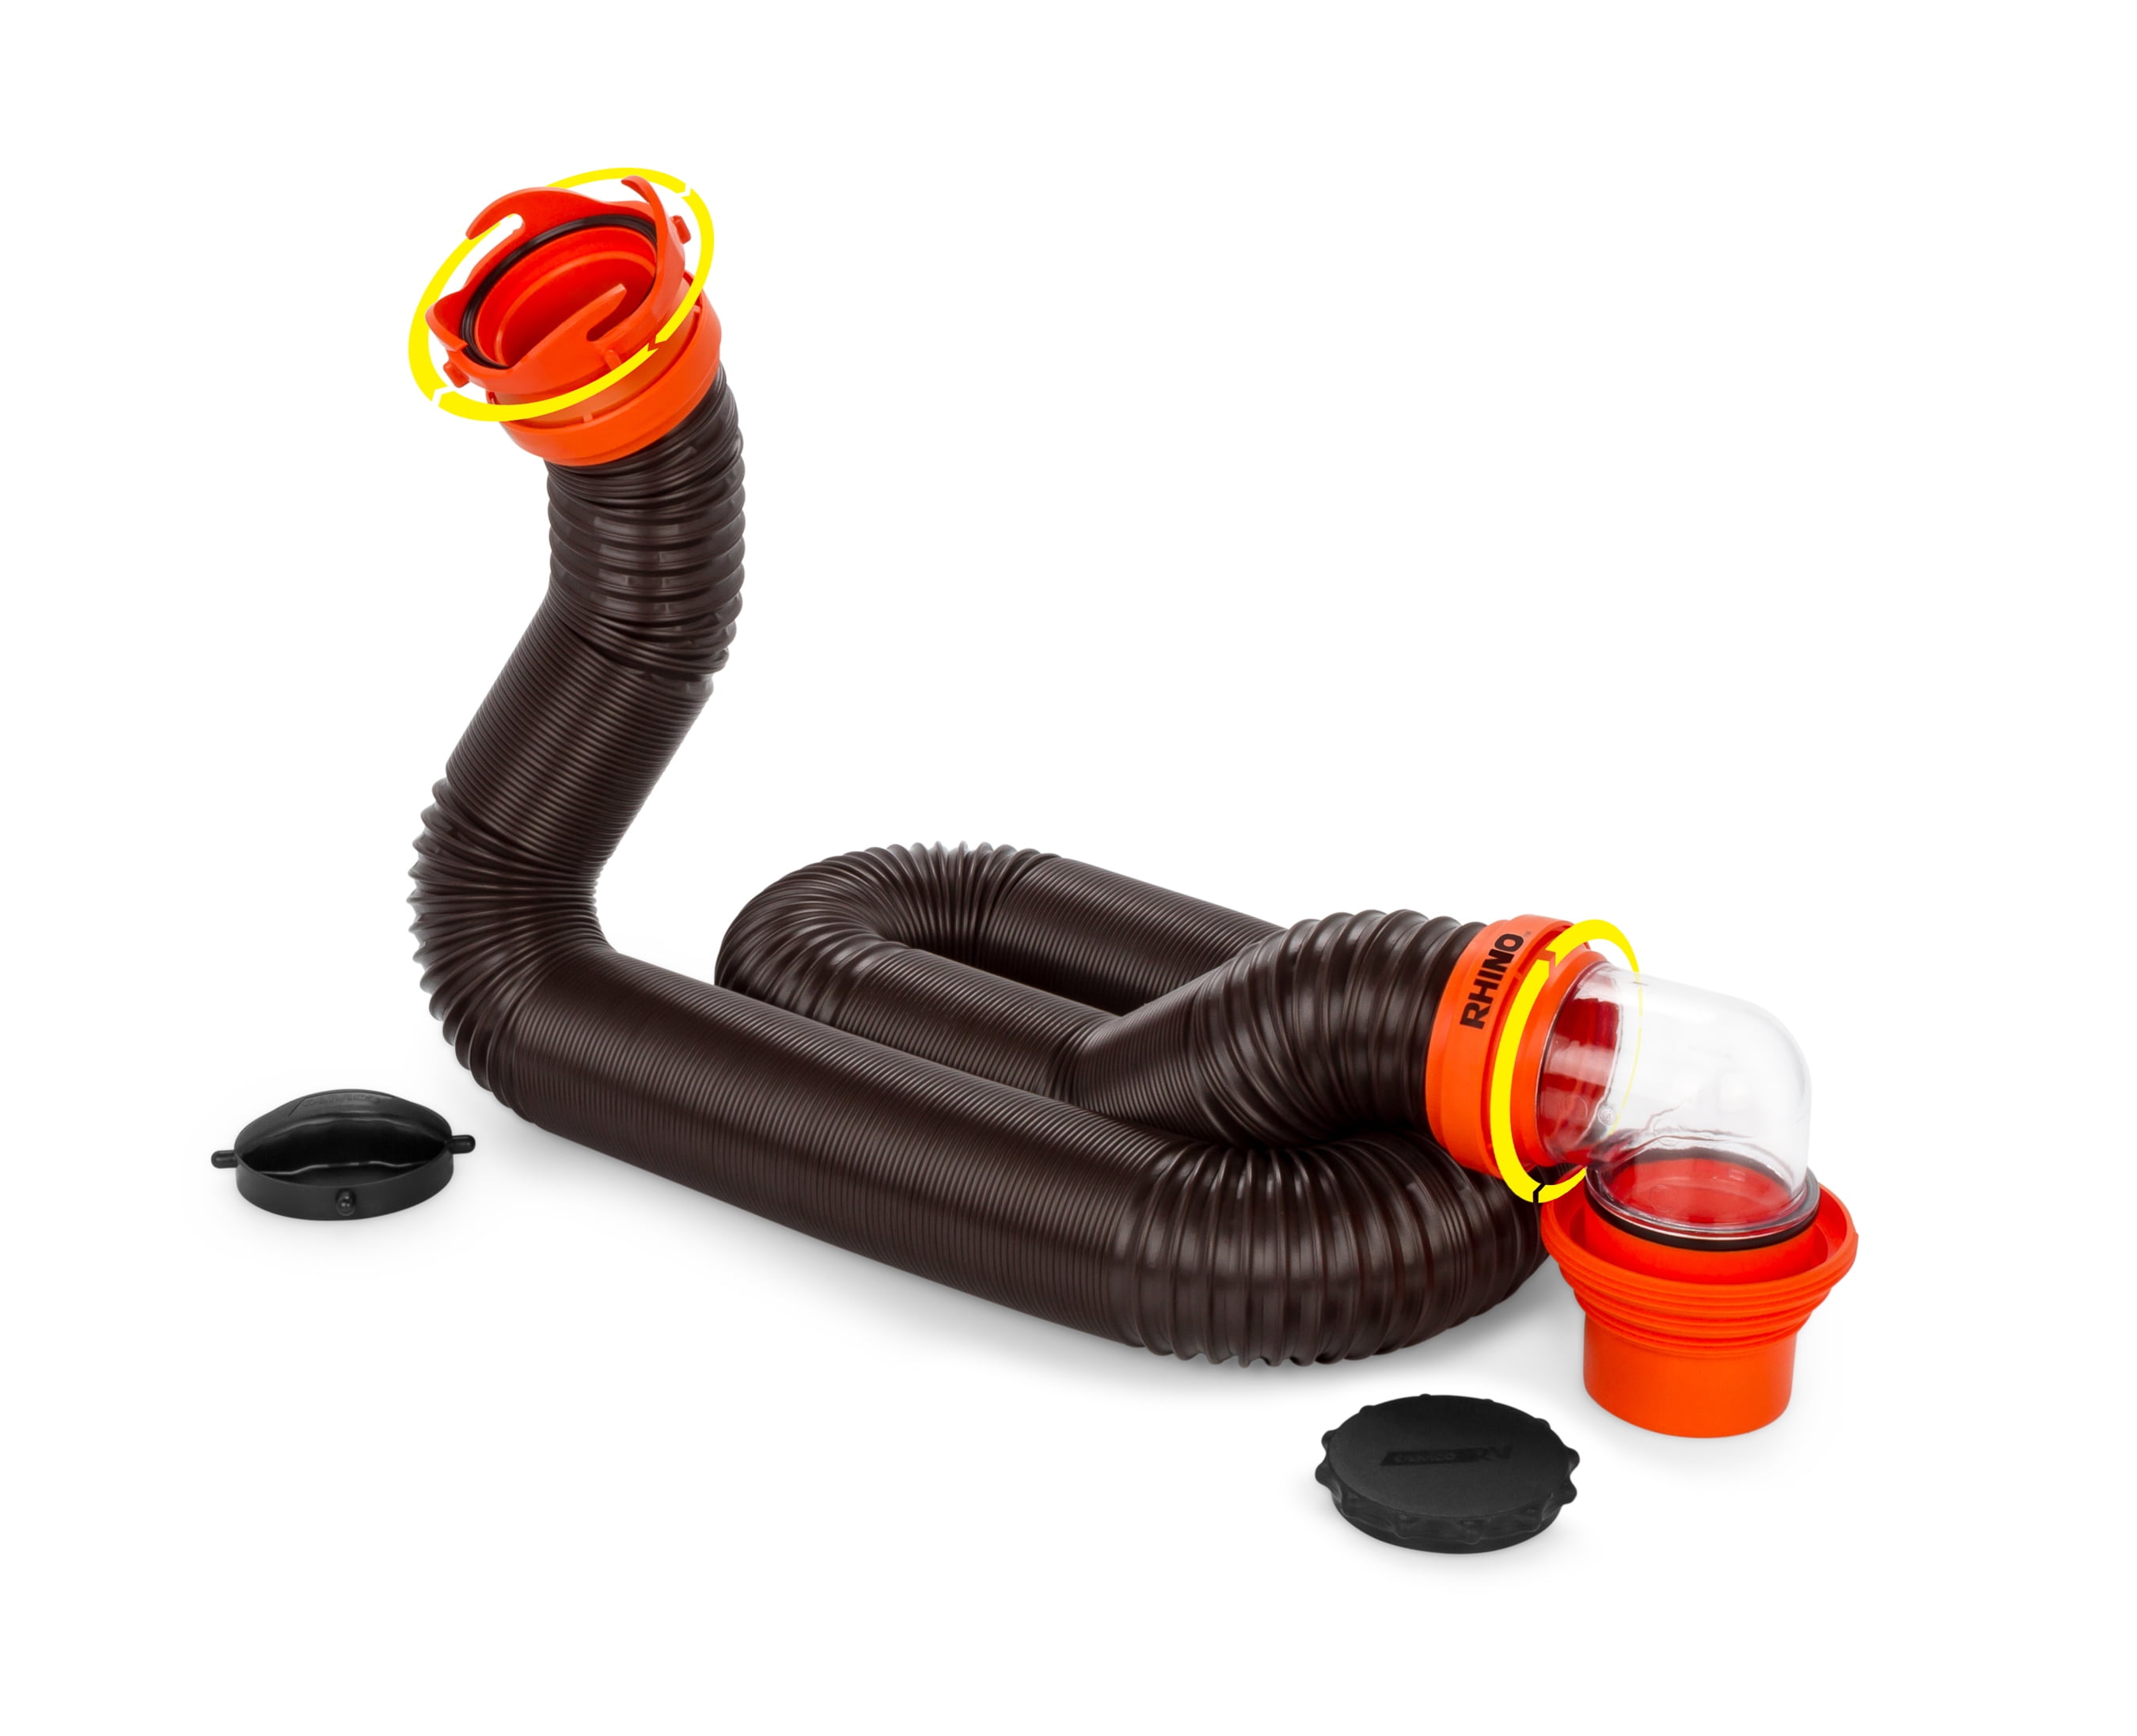 PVC Suction Hose Prices Slashed Due To Cancelled Order BEST E-BAY VALUE !!!!! 